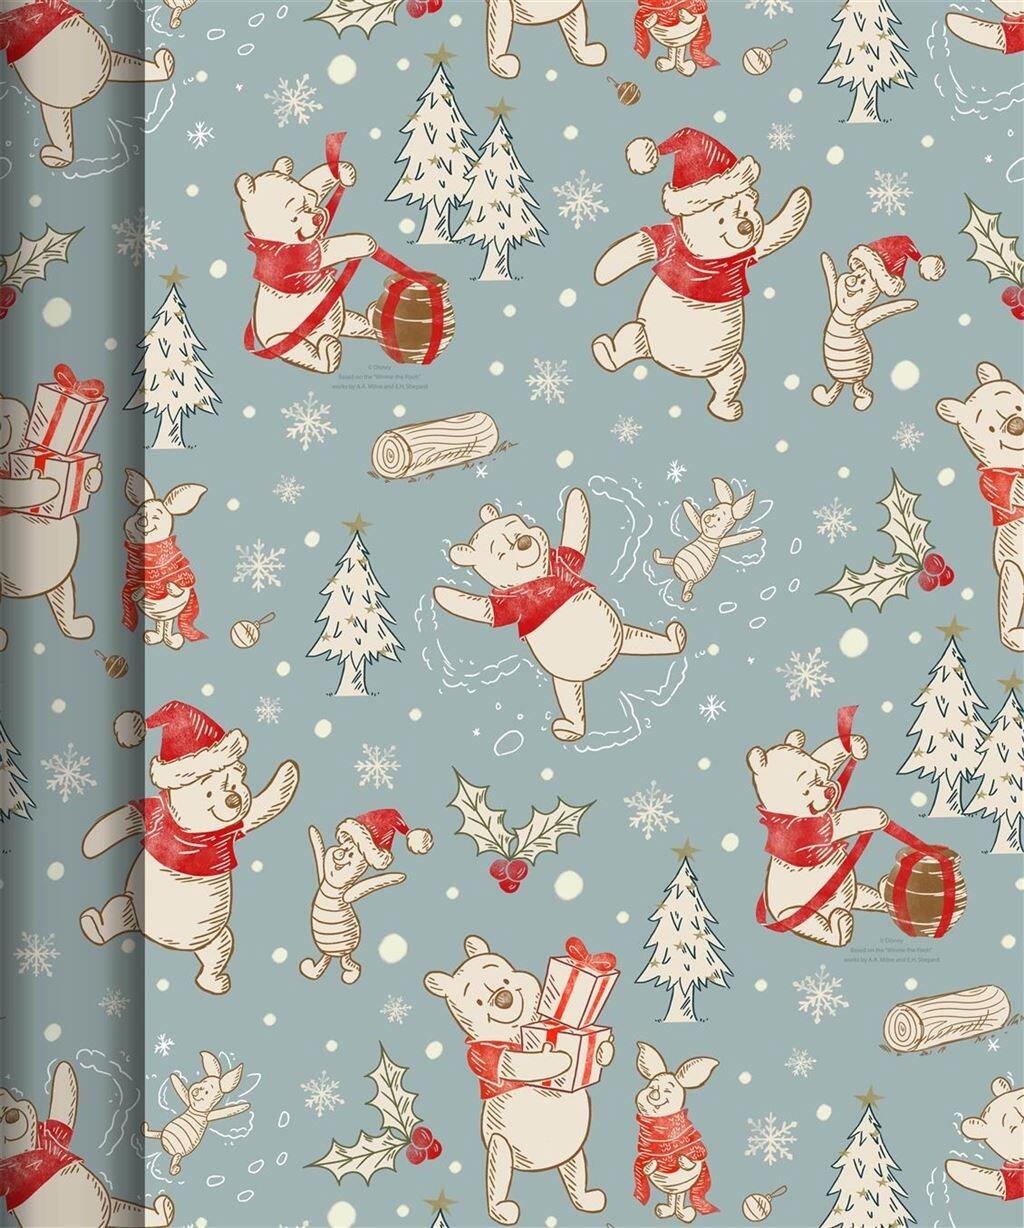 3 Winnie The Pooh Christmas Gift Wrapping Paper Rolls 4m